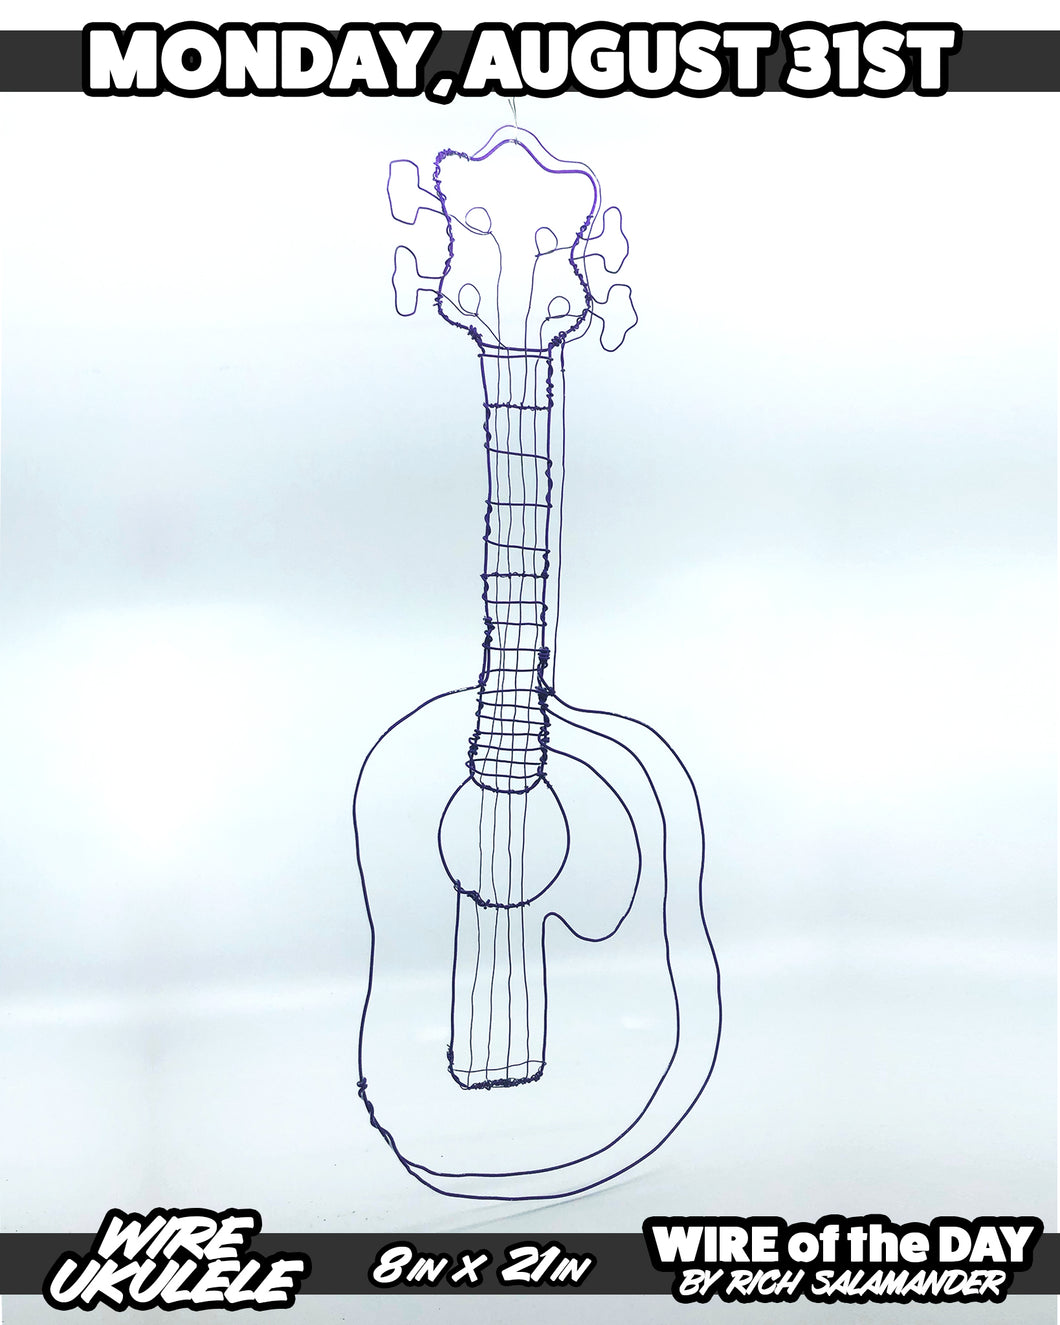 WIRE of the DAY  WIRE UKULELE